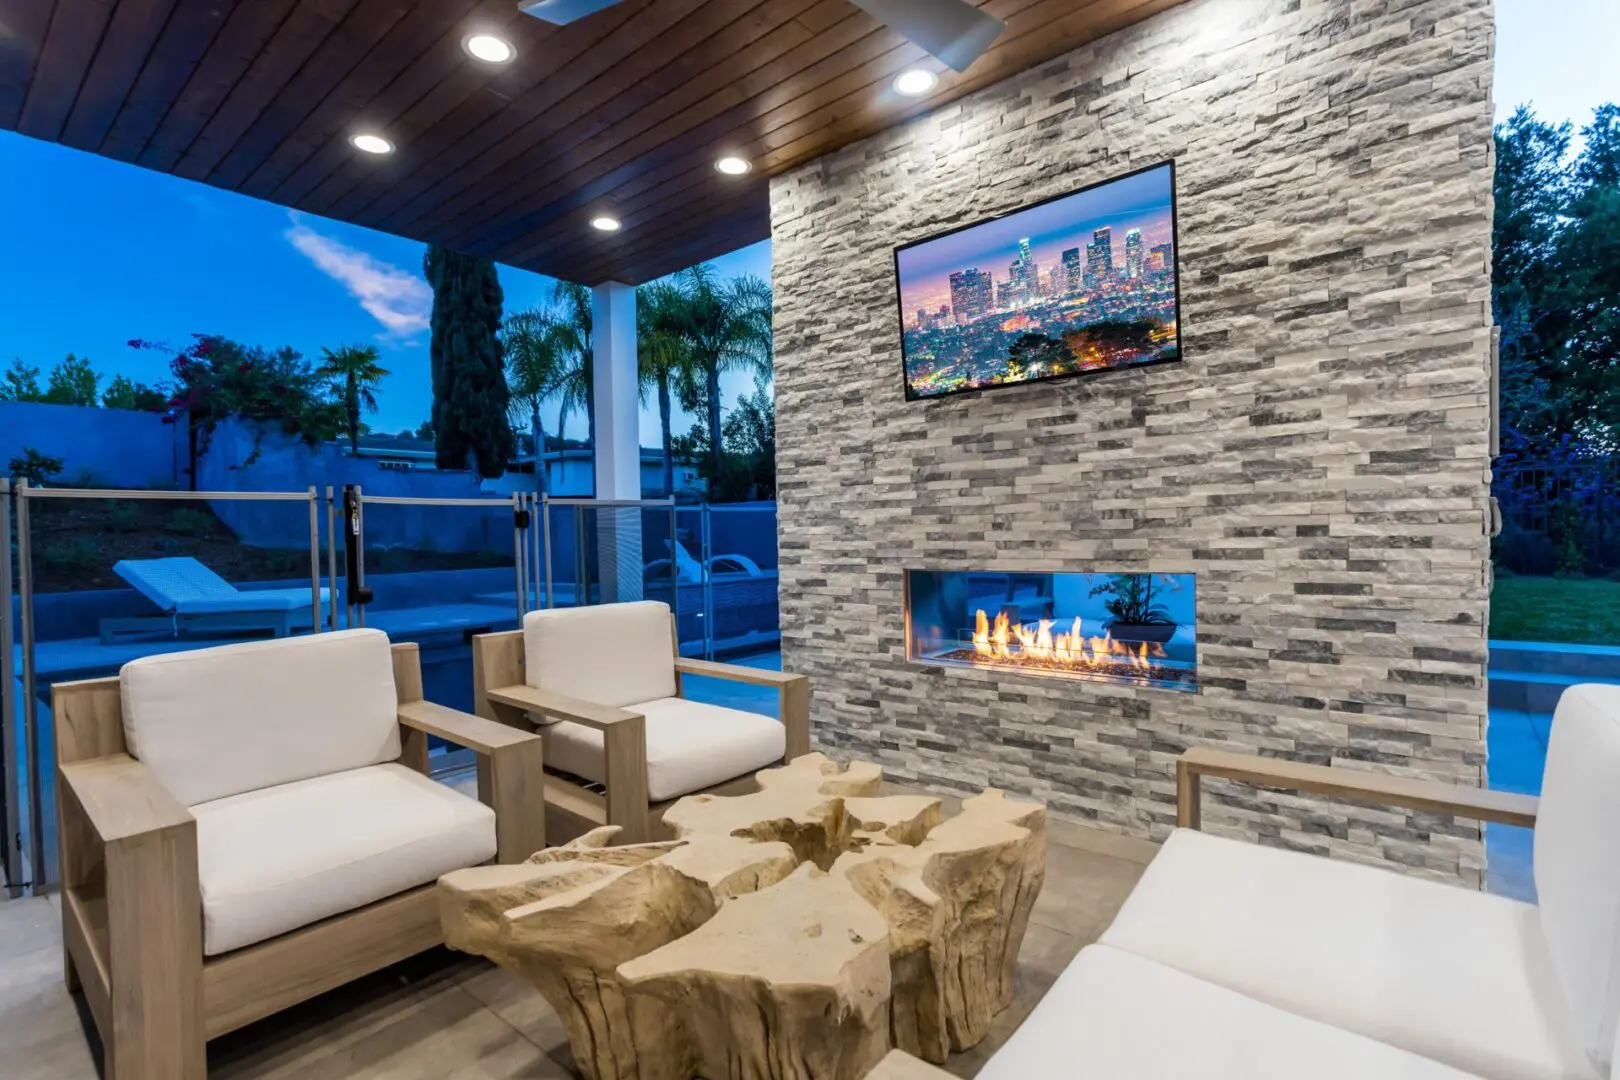 outdoor entertainment with fireplace and TV at night